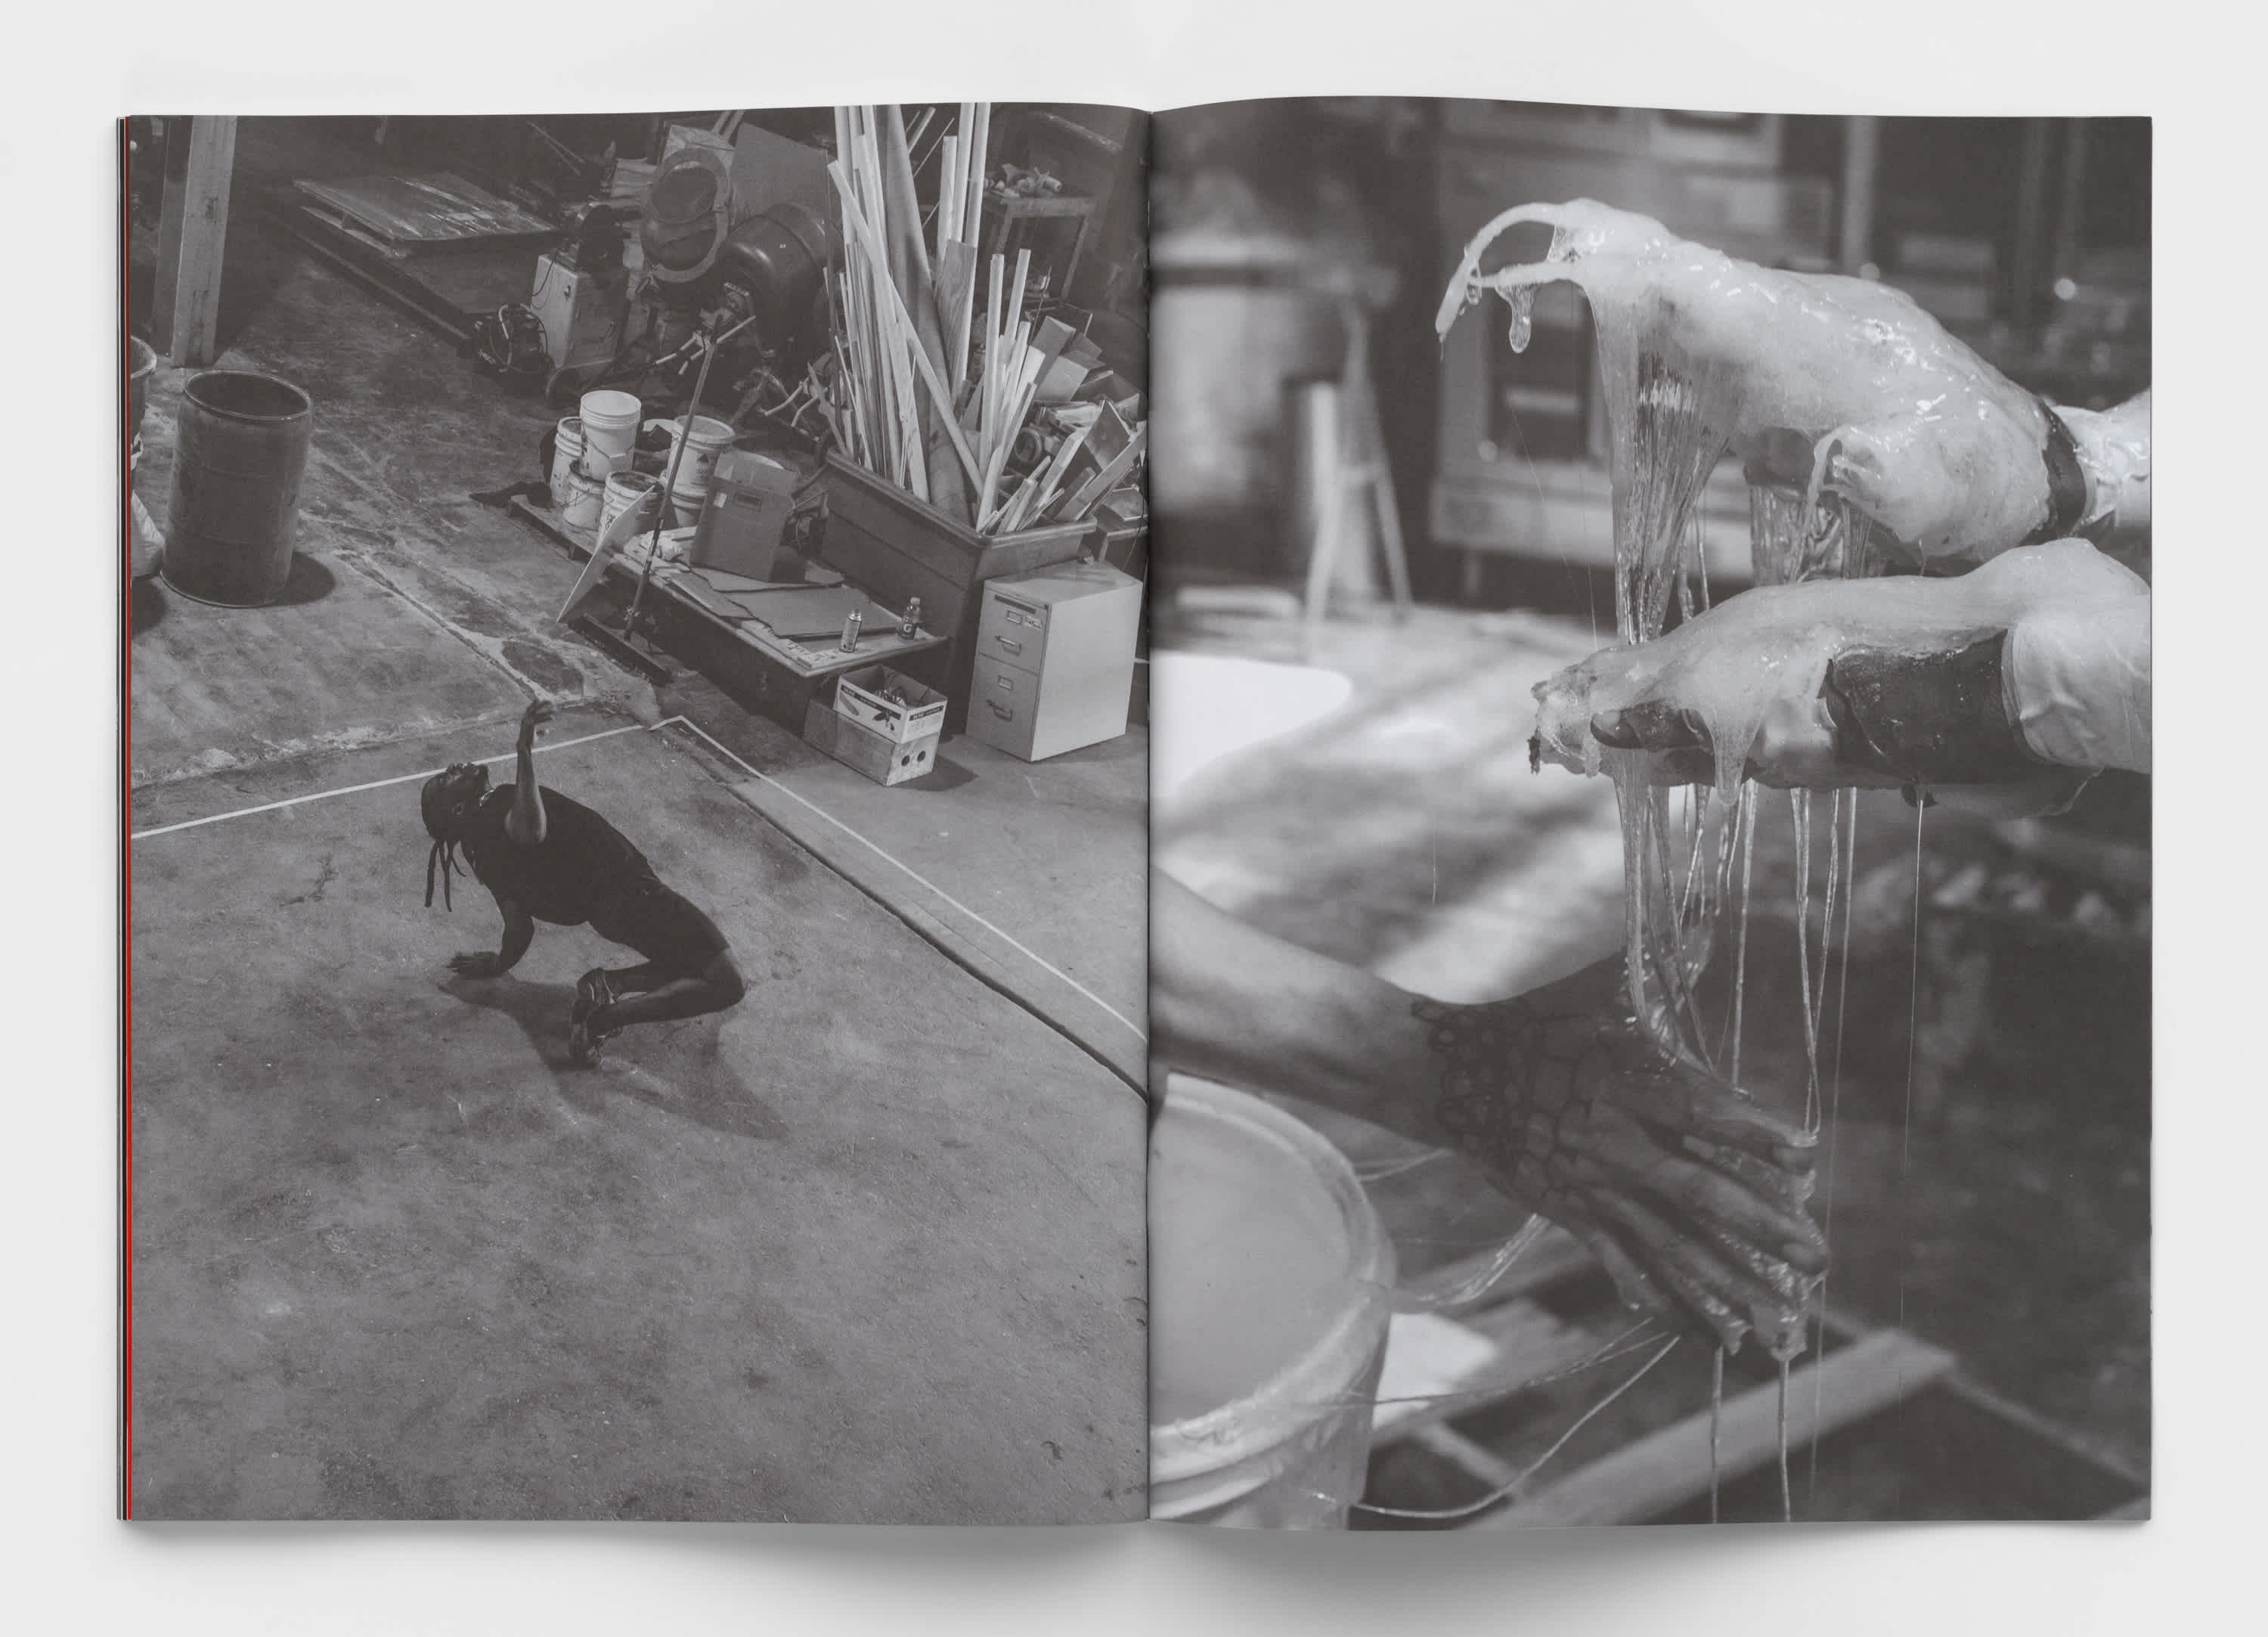 Two page black and white spread of the book 'Secondary' created for Matthew Barney's exhibition of the same name. The left page is a rehearsal image of a performer dancing in the warehouse space. The right image is a close-up of hands working with resin.